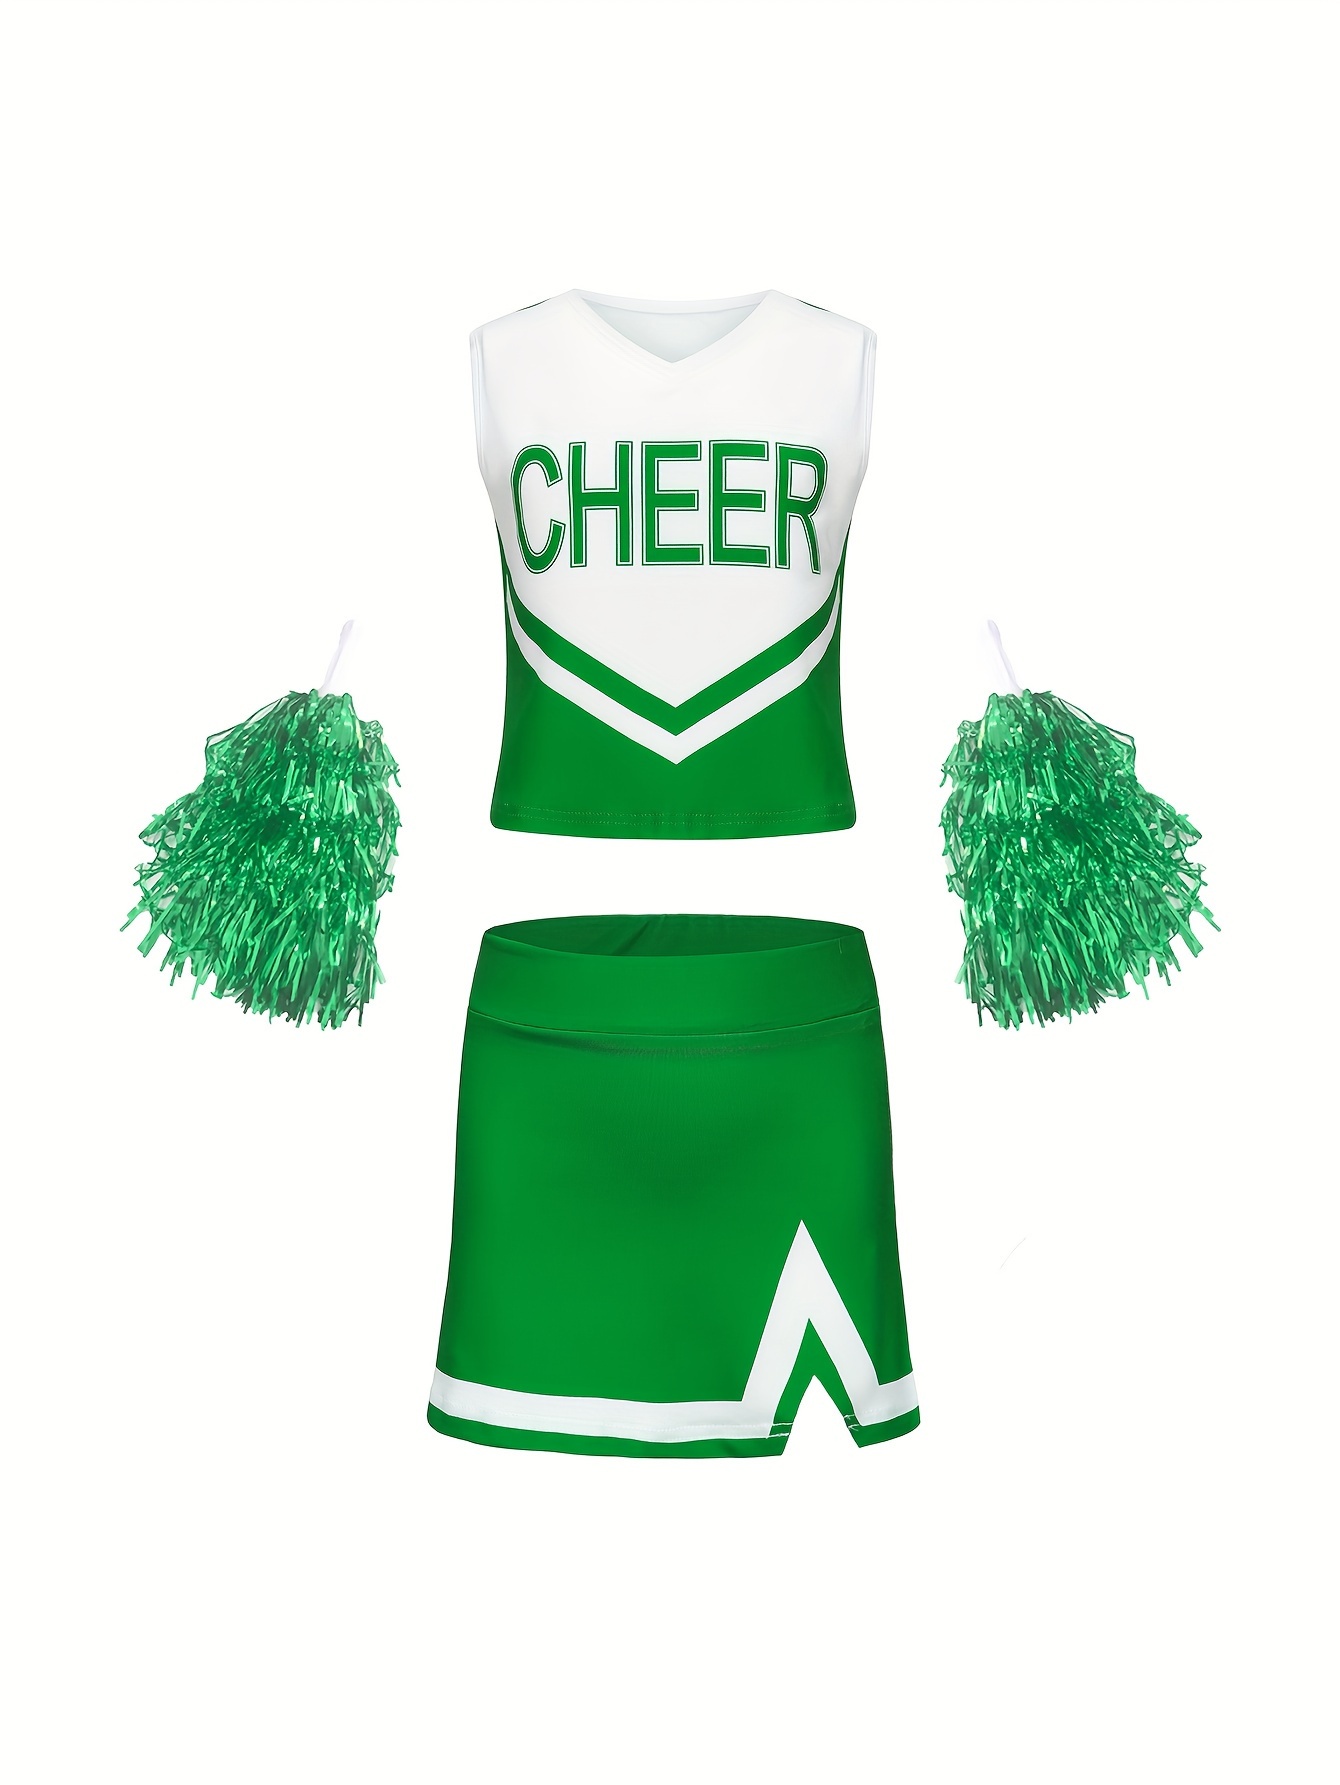 Cheerleader Costume for Girls Cheerleader Outfit with Pom Poms for  Halloween Sports Cheerleader Gifts